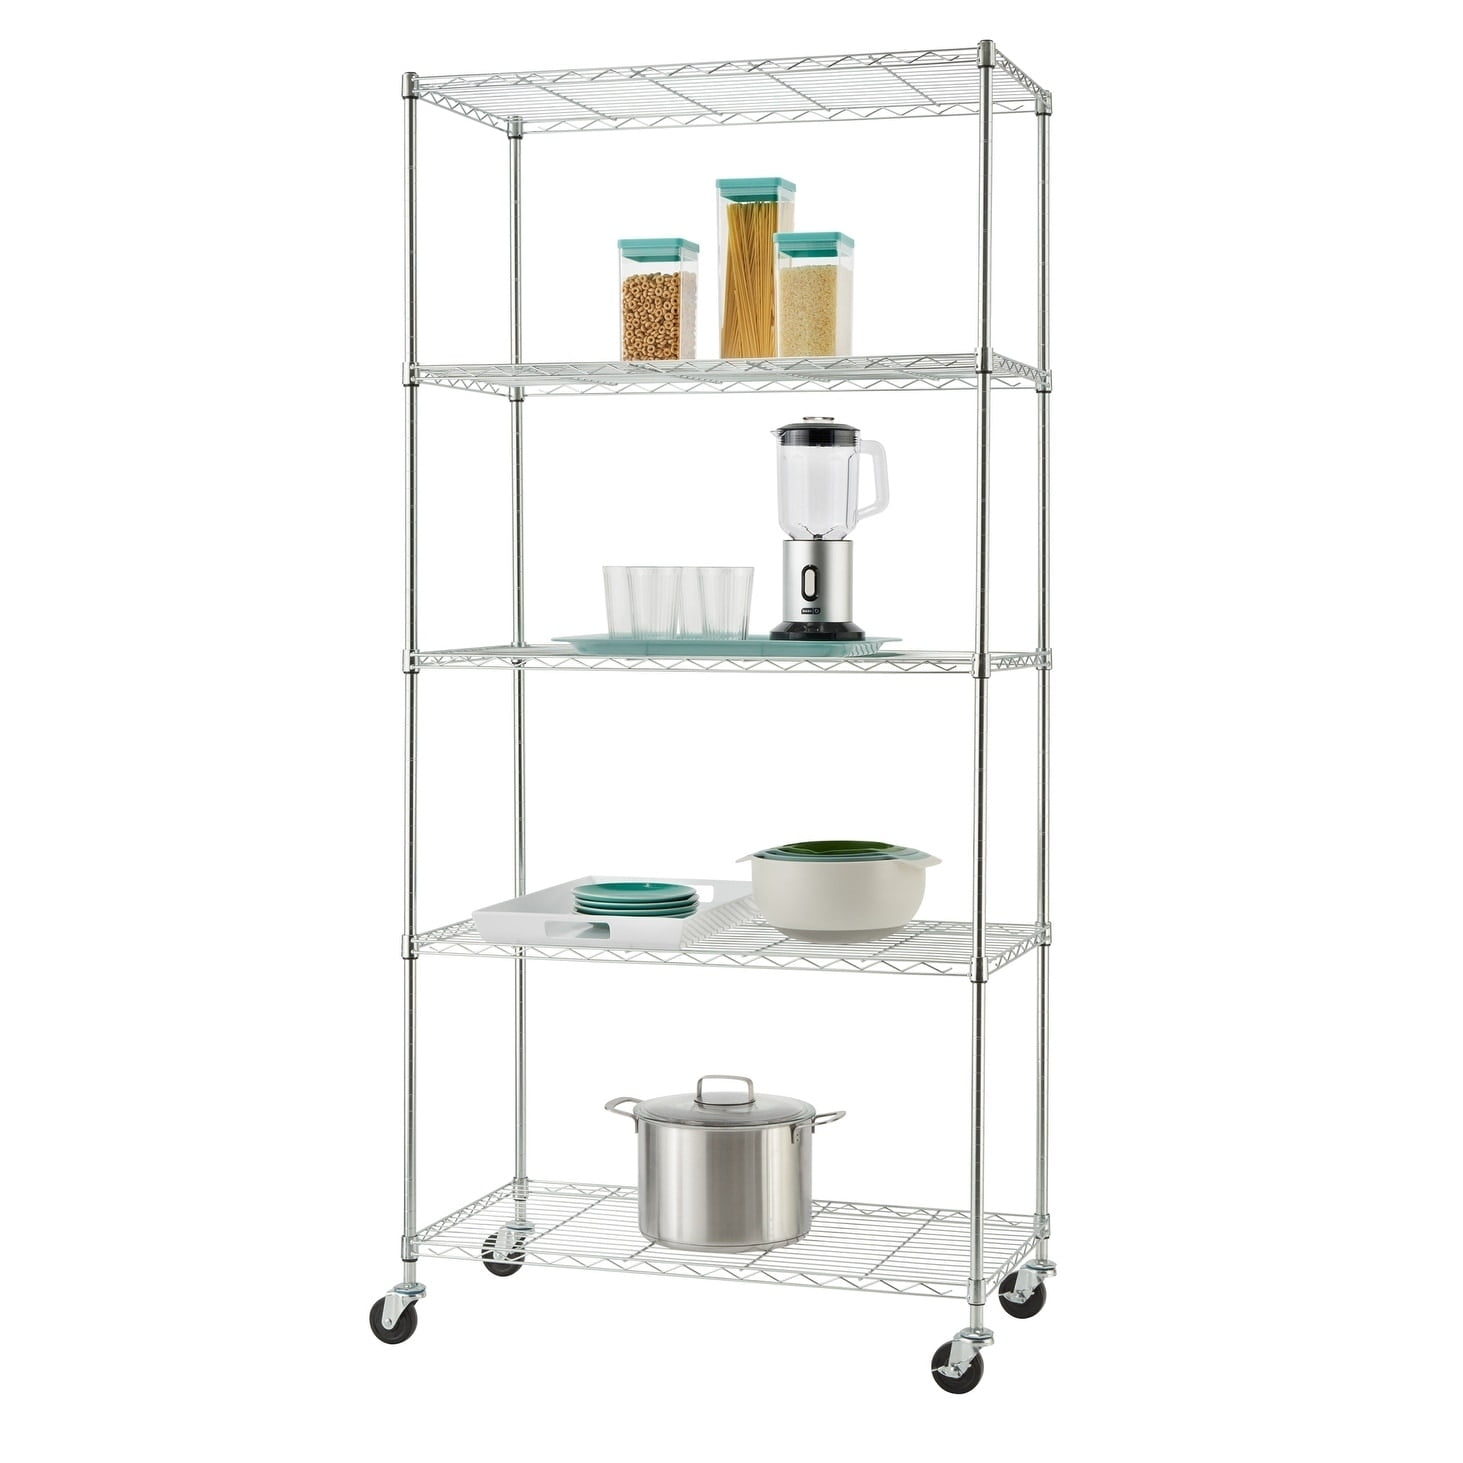 NSF Chrome Wire 4-Shelf Kit with 74 Garage inch. inch. 14 Posts.Kitchen Storage Cabinet Shelf Organizer Commercial x 54 Perfect for Home inch. 